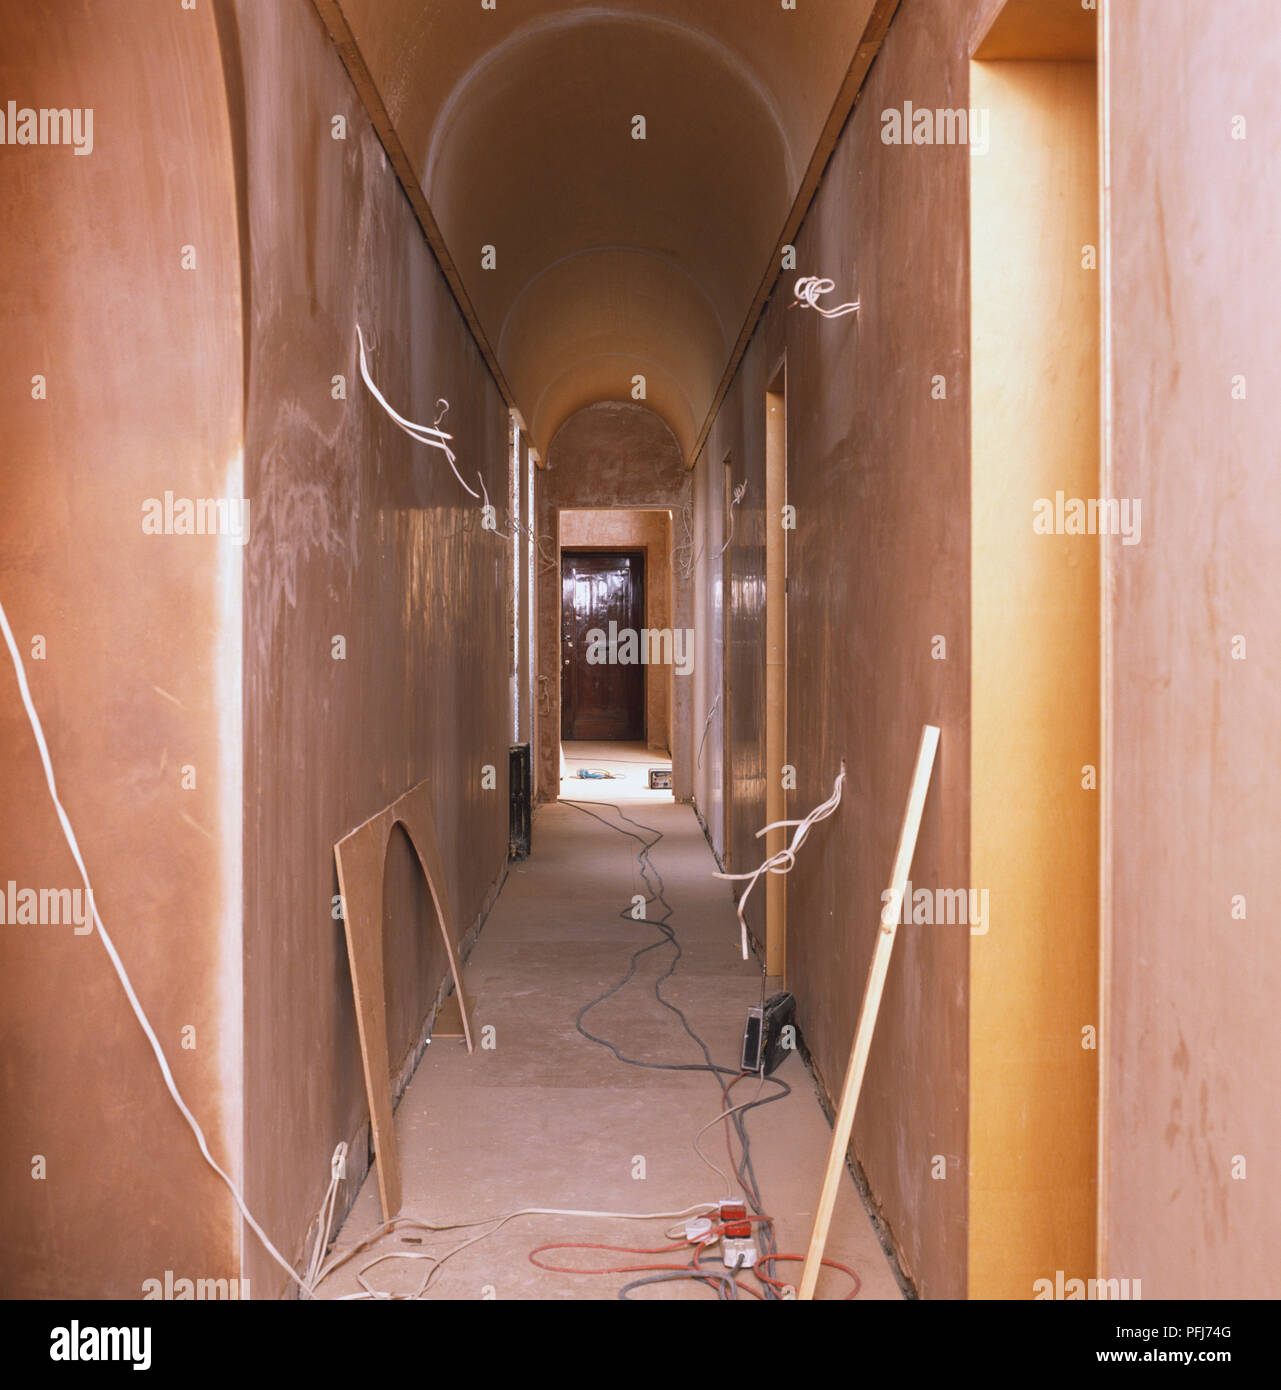 Corridor of building undergoing refurbishment, stripped walls, wires and leads stretched across floor, wooden fittings resting on wall. Stock Photo